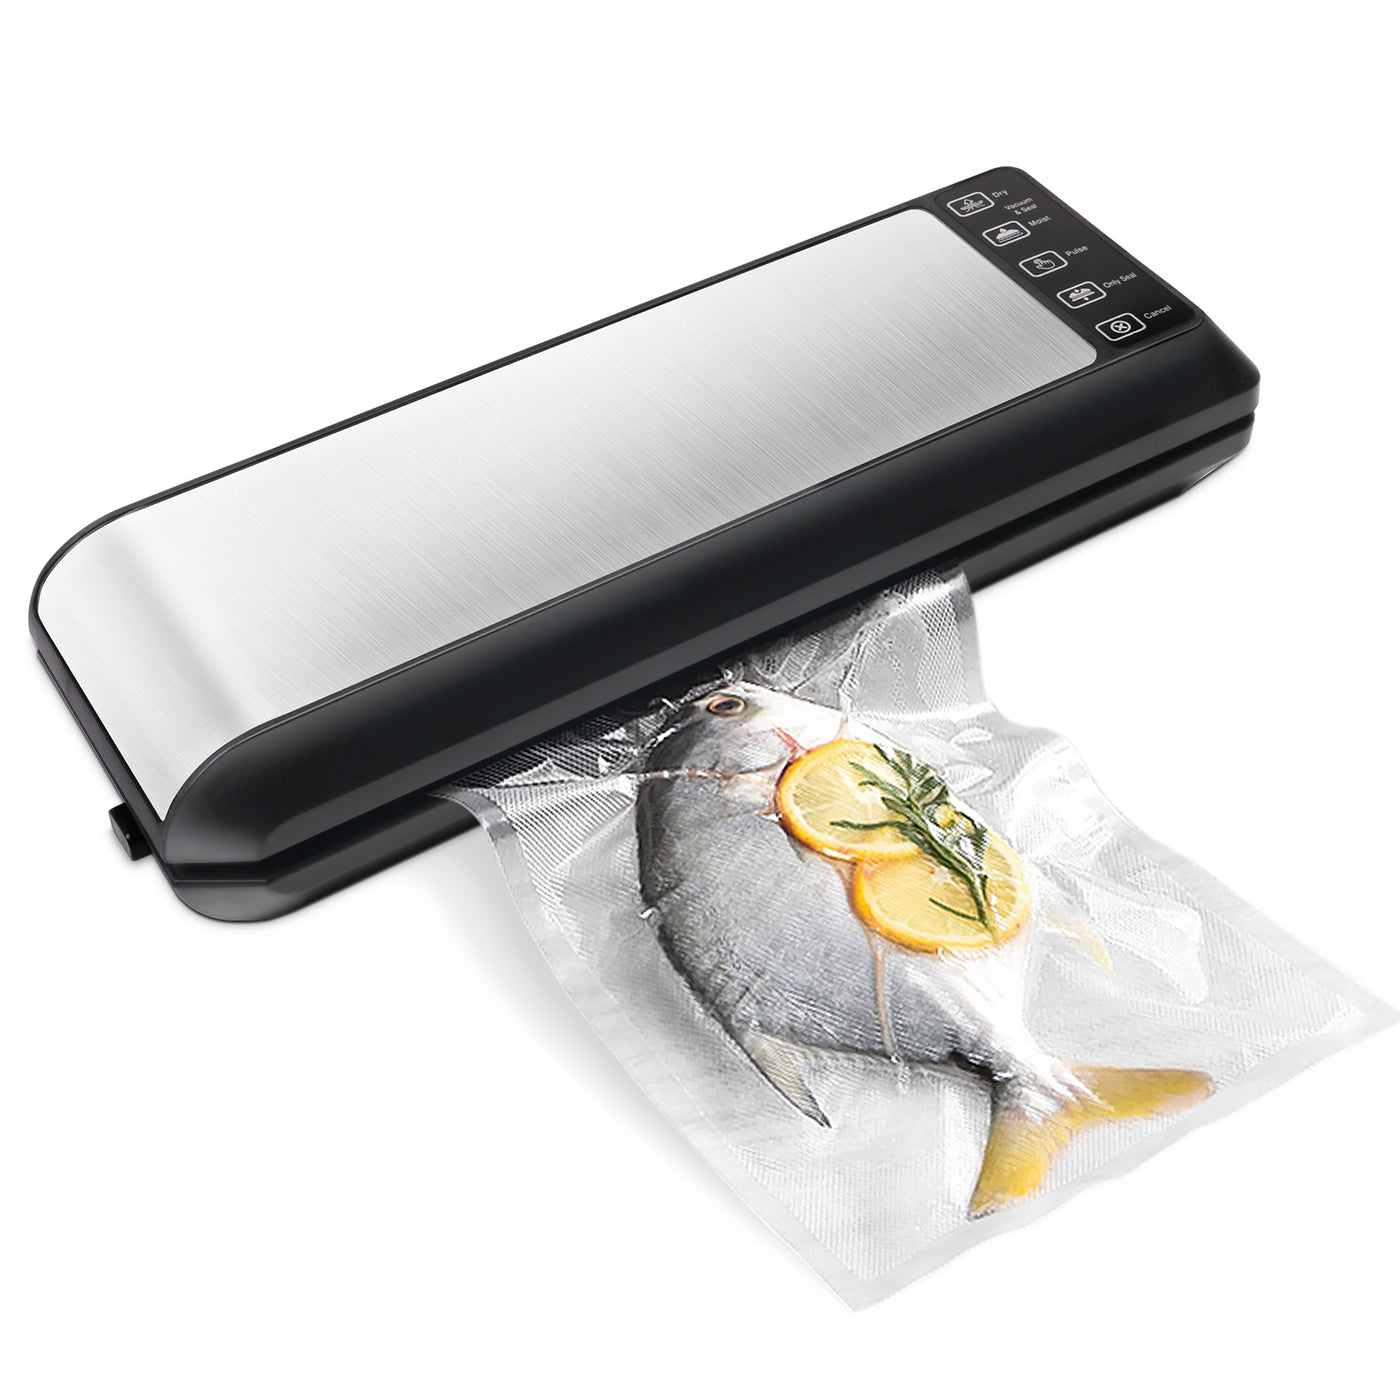 Vacuum Sealer for Food Storage Multiple Modes Built-in Cutter with Sealer Bags